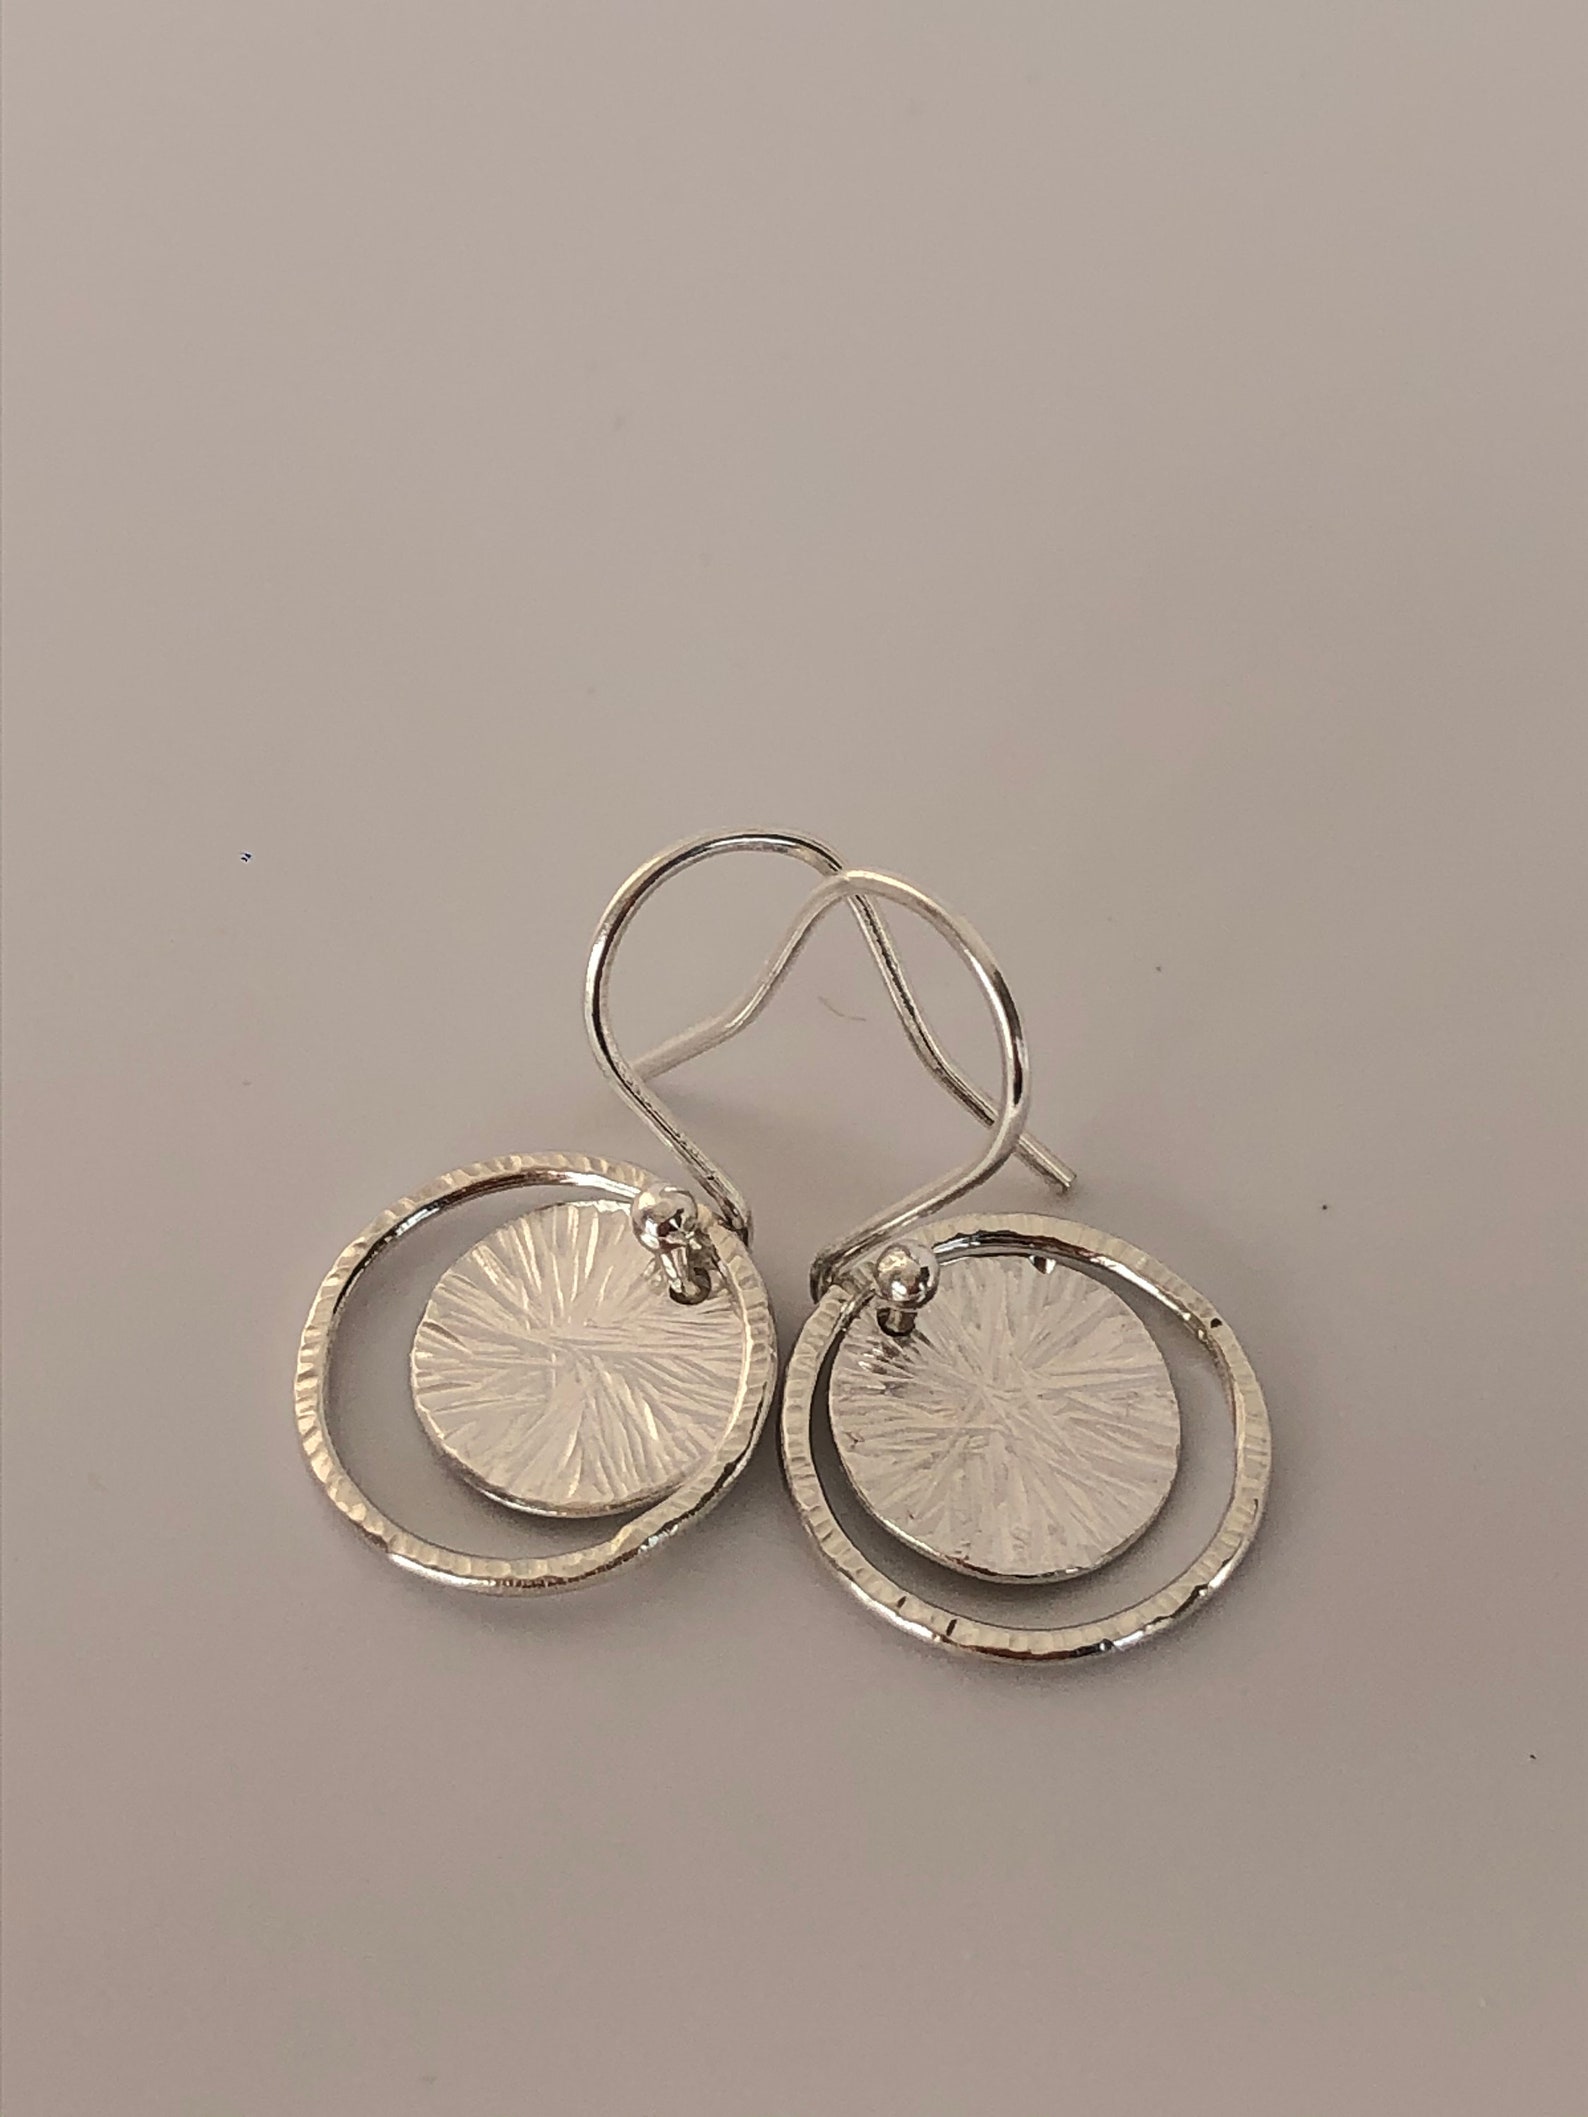 Beautifully Hand Textured Silver Earrings. Silver Disc Within - Etsy UK